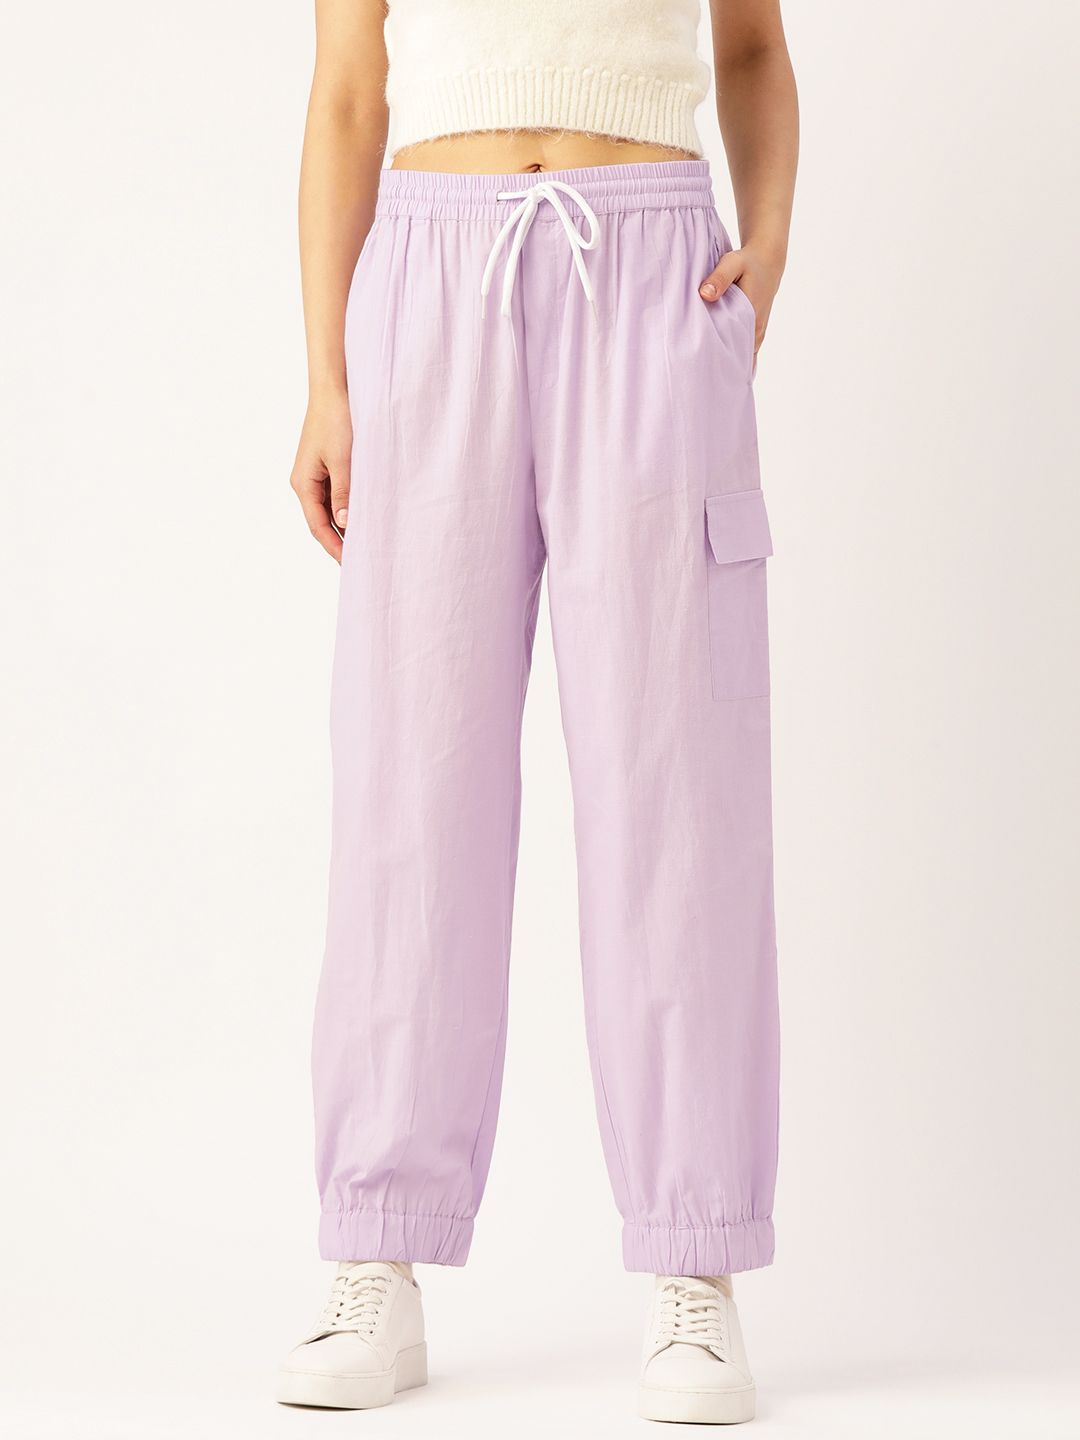 DressBerry Women Lavender Textured Knit Pure Cotton Joggers Trousers Price in India